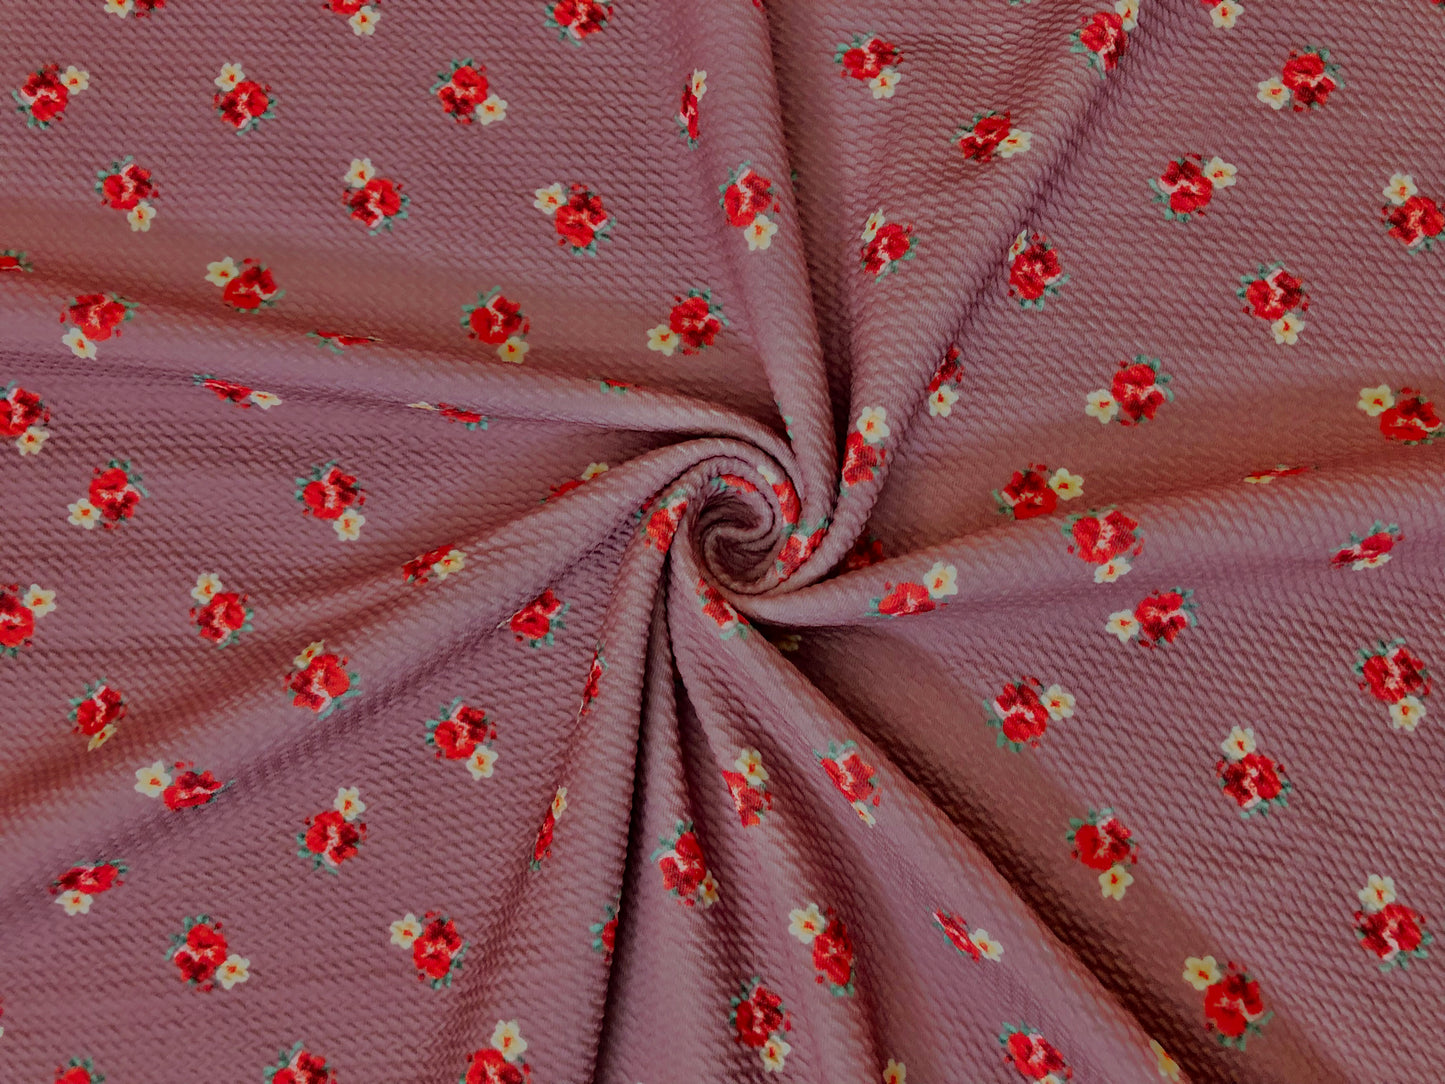 Bullet Knit Printed Fabric-Mauve Red Roses-BPR260-Sold by the Yard